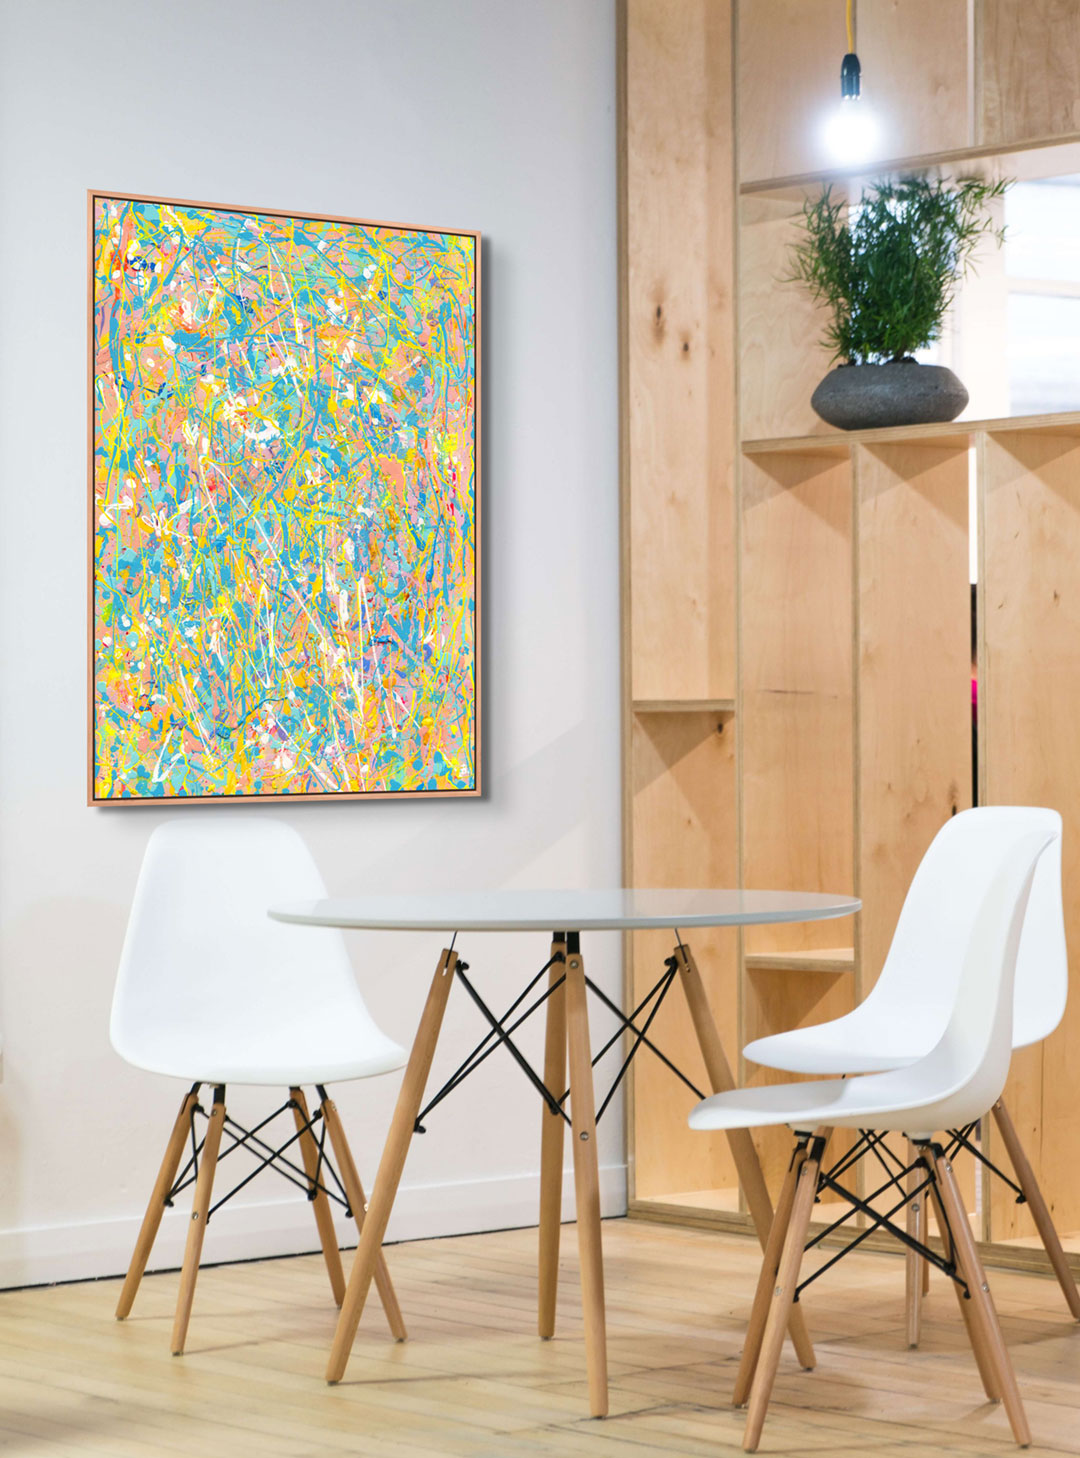 'Naked' Fine Art Canvas Print seen in Solid Oak Float Frame Hanging in Dining Area Above Table and White Chairs. Large Fine Art print after the Original Painting by Bridget Bradley